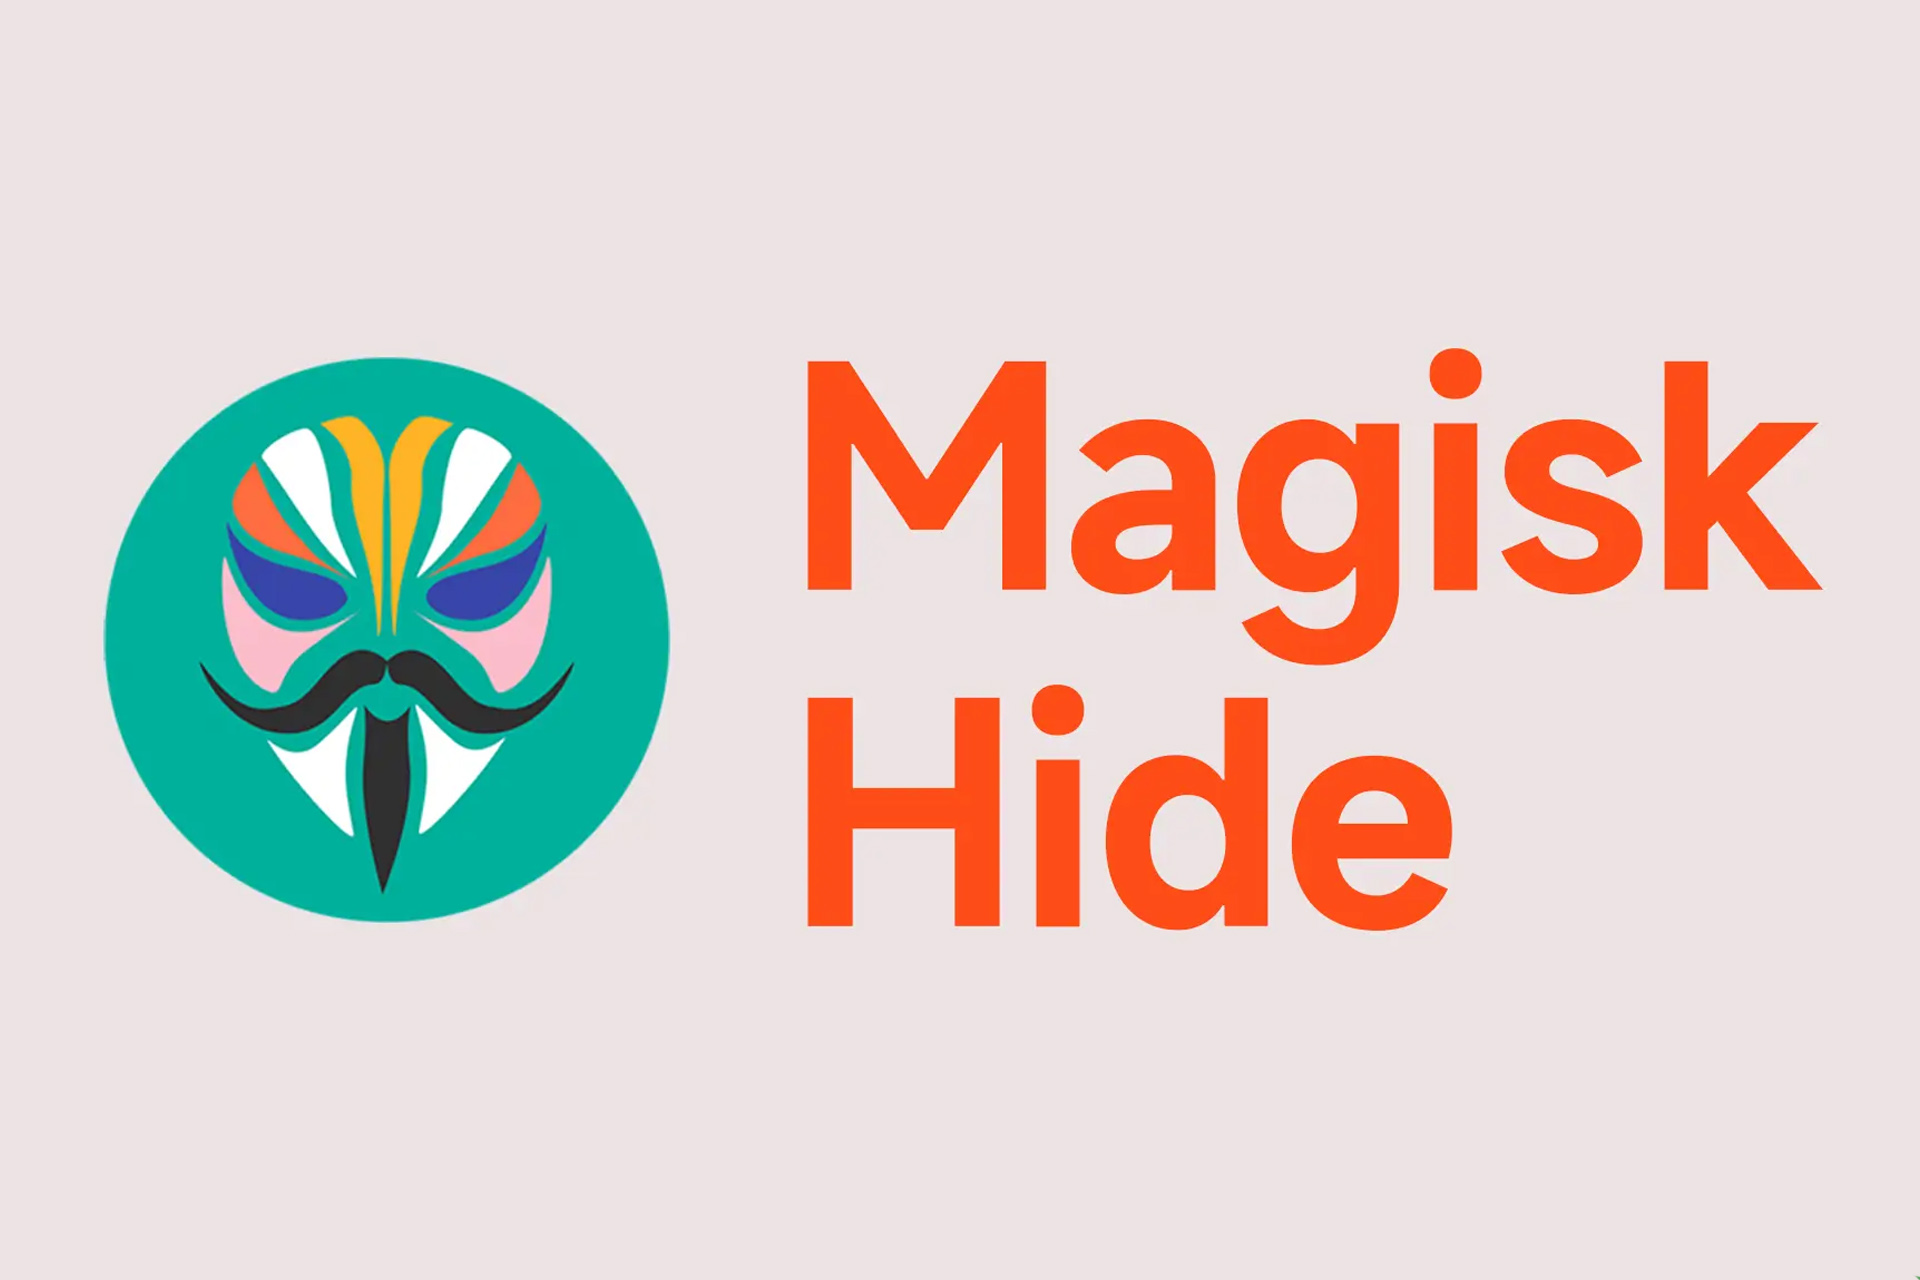 How to Use Magisk Hide?